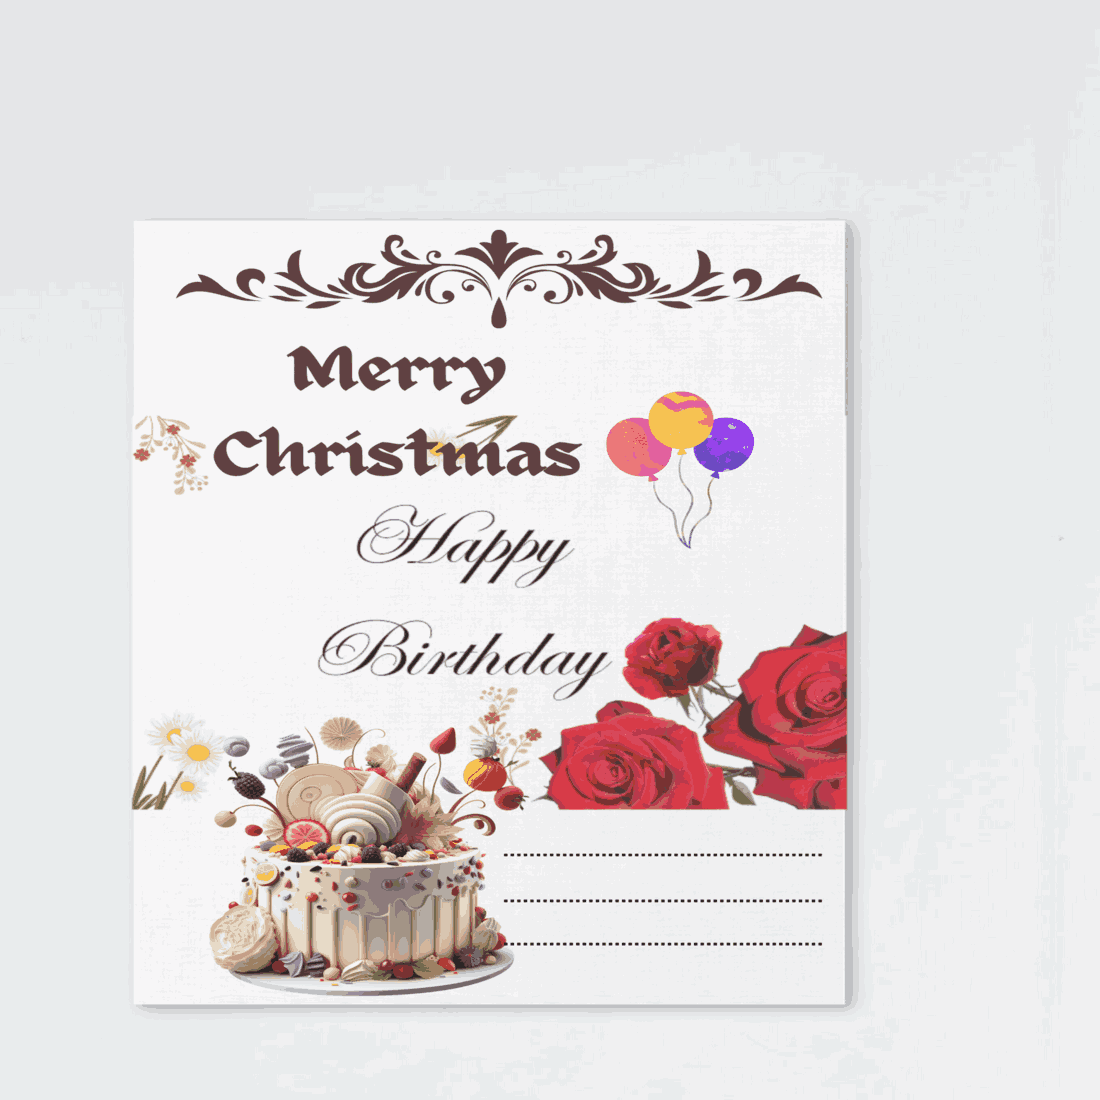 Beautiful design birthday card, merry Christmas cover image.